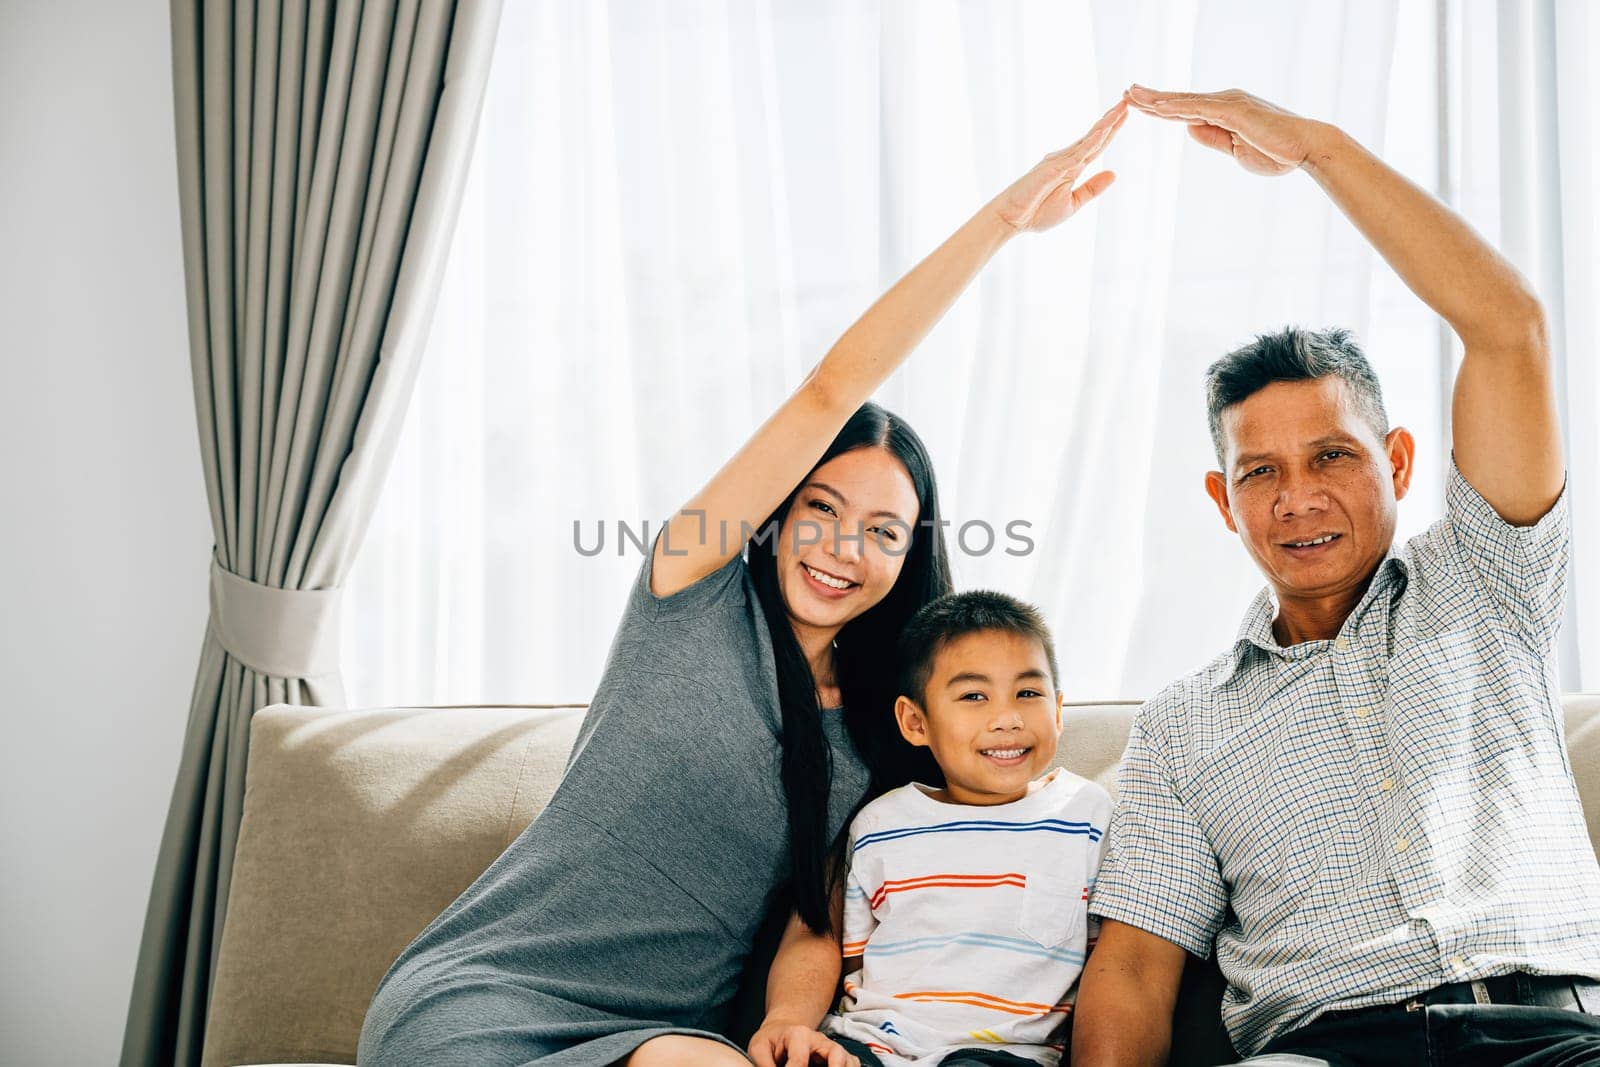 A happy family of four on a sofa parents gesturing a roof above their little son. Depicting concepts of house insurance children protection and future planning ensuring family safety and unity.